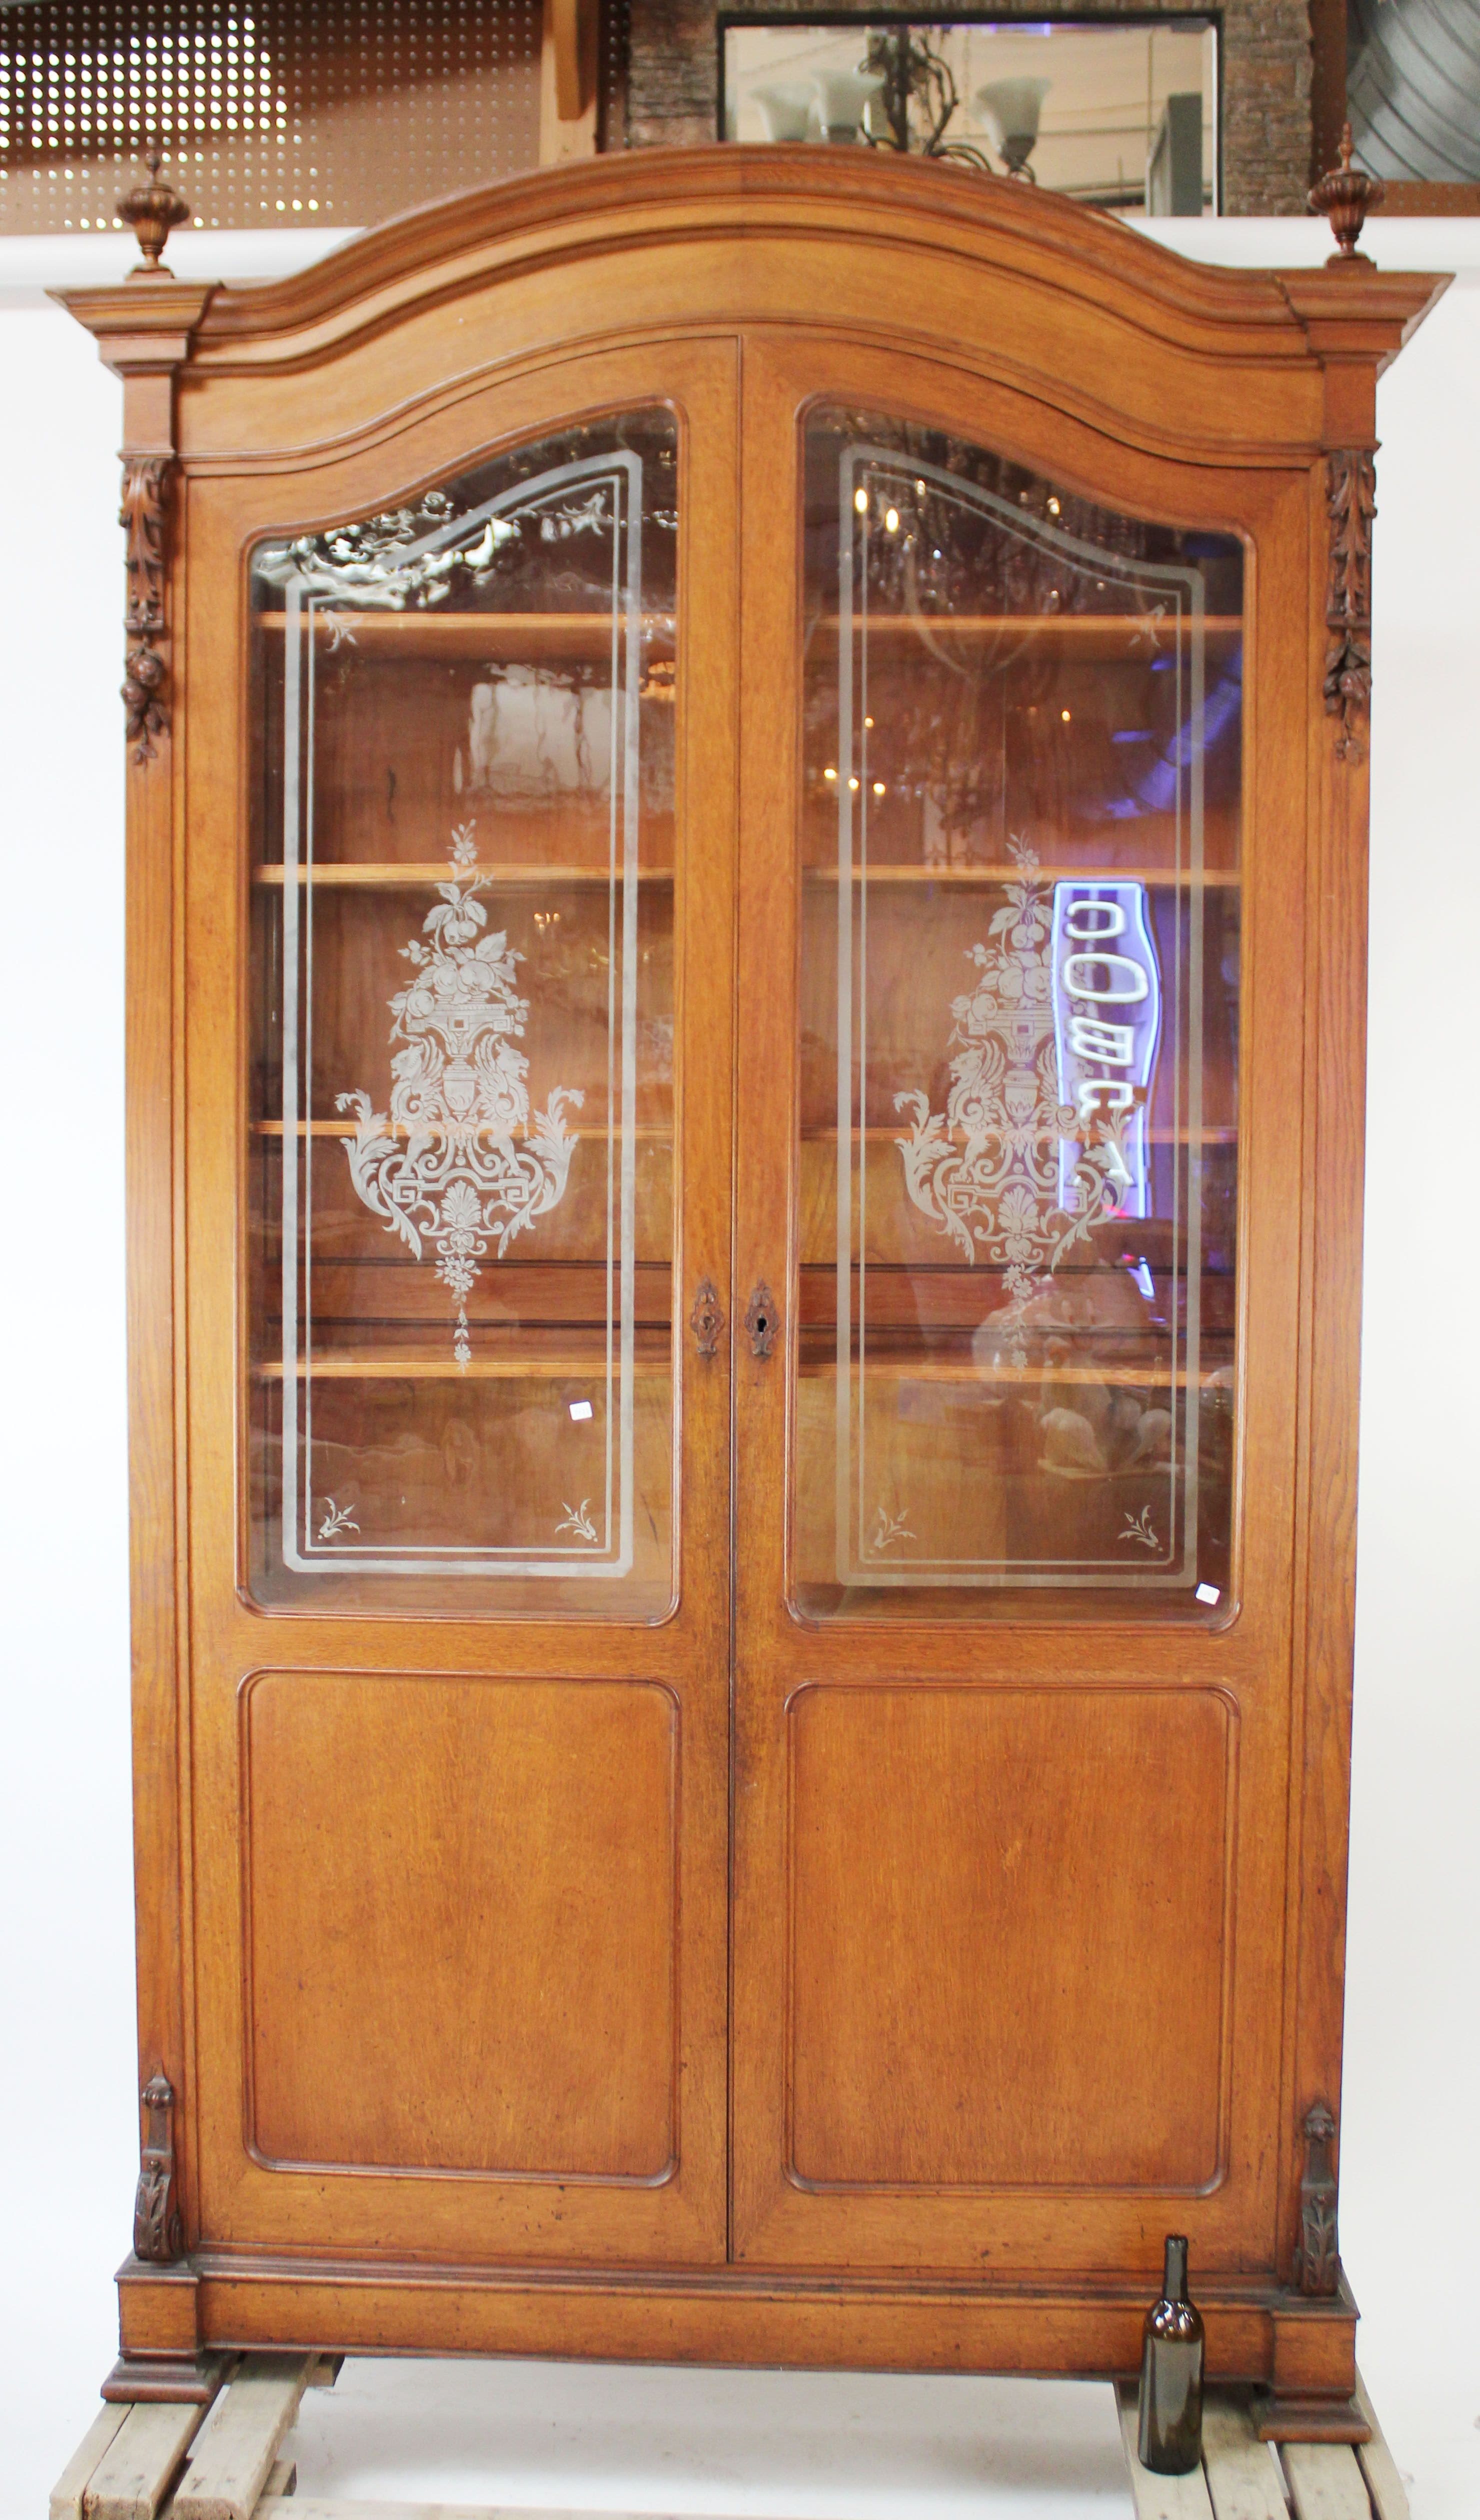 Italian bookcase with etched glass doors